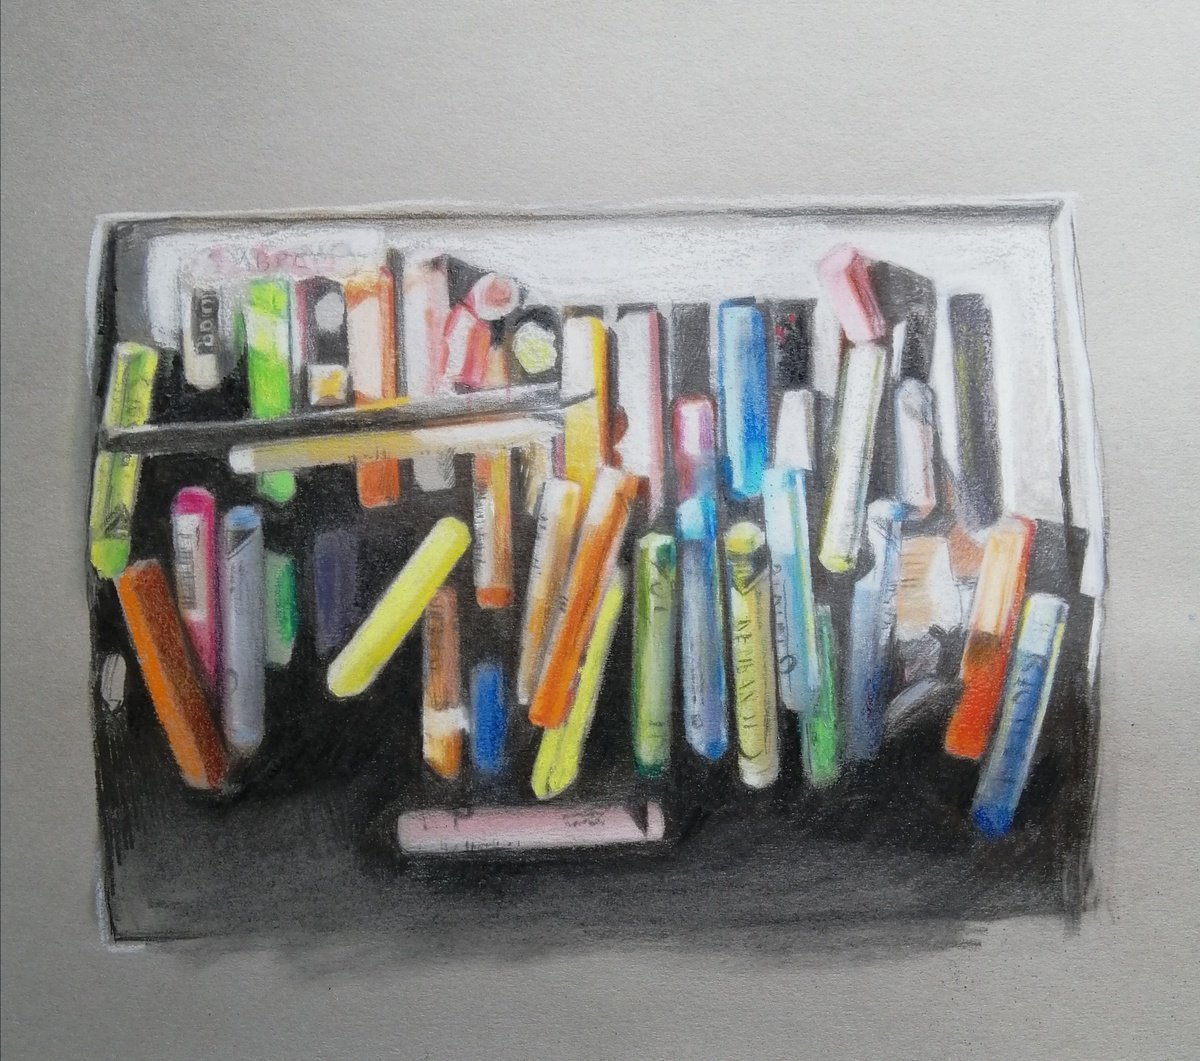 Pastels and pencils by Rosemary Burn